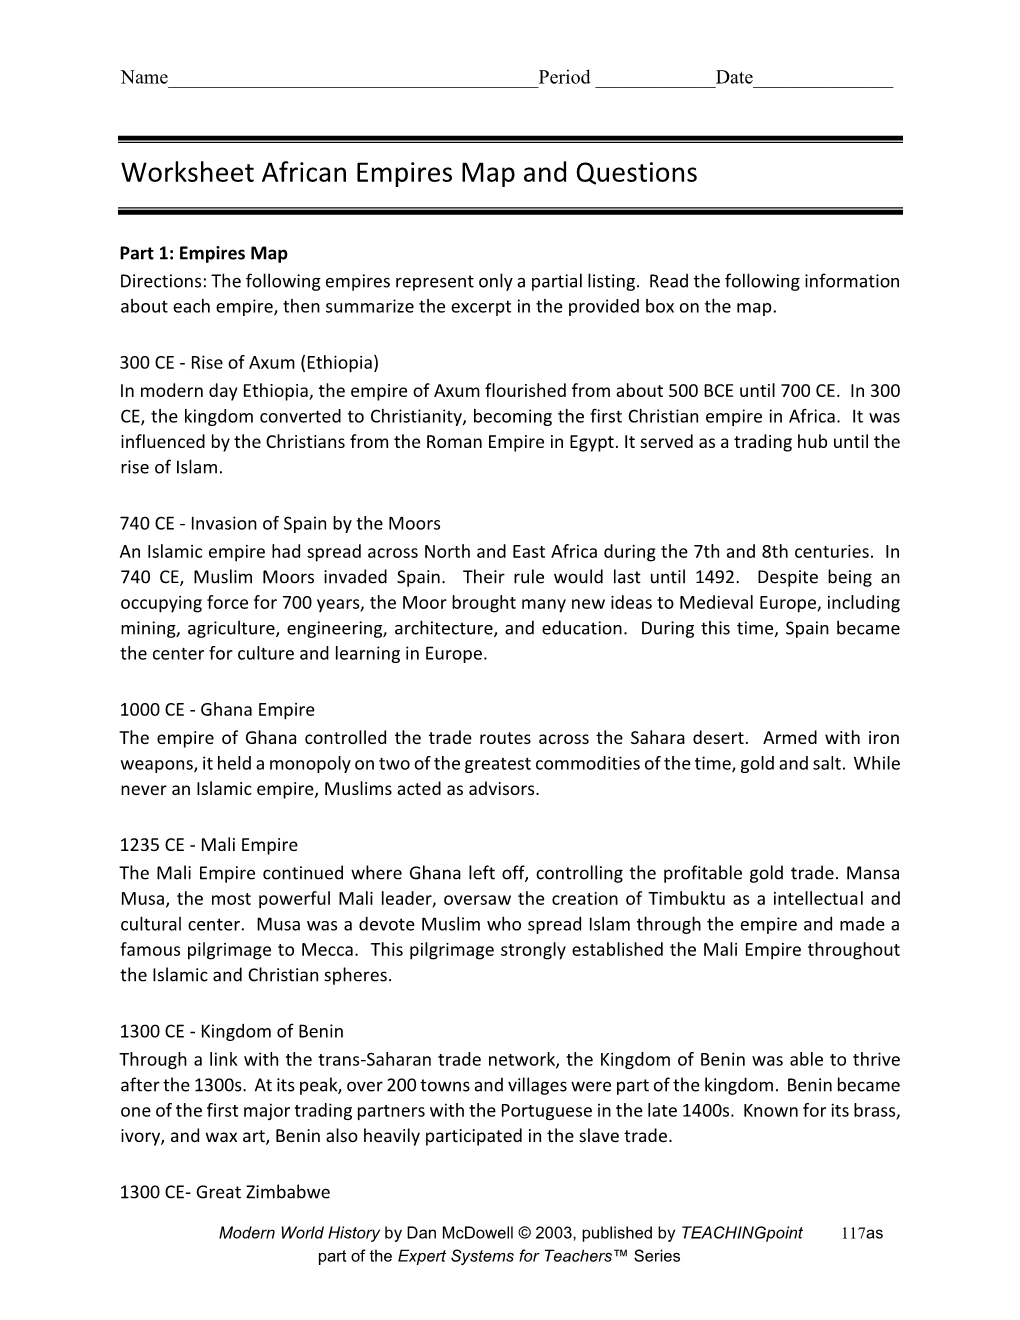 Worksheet African Empires Map And Questions Early Africa African